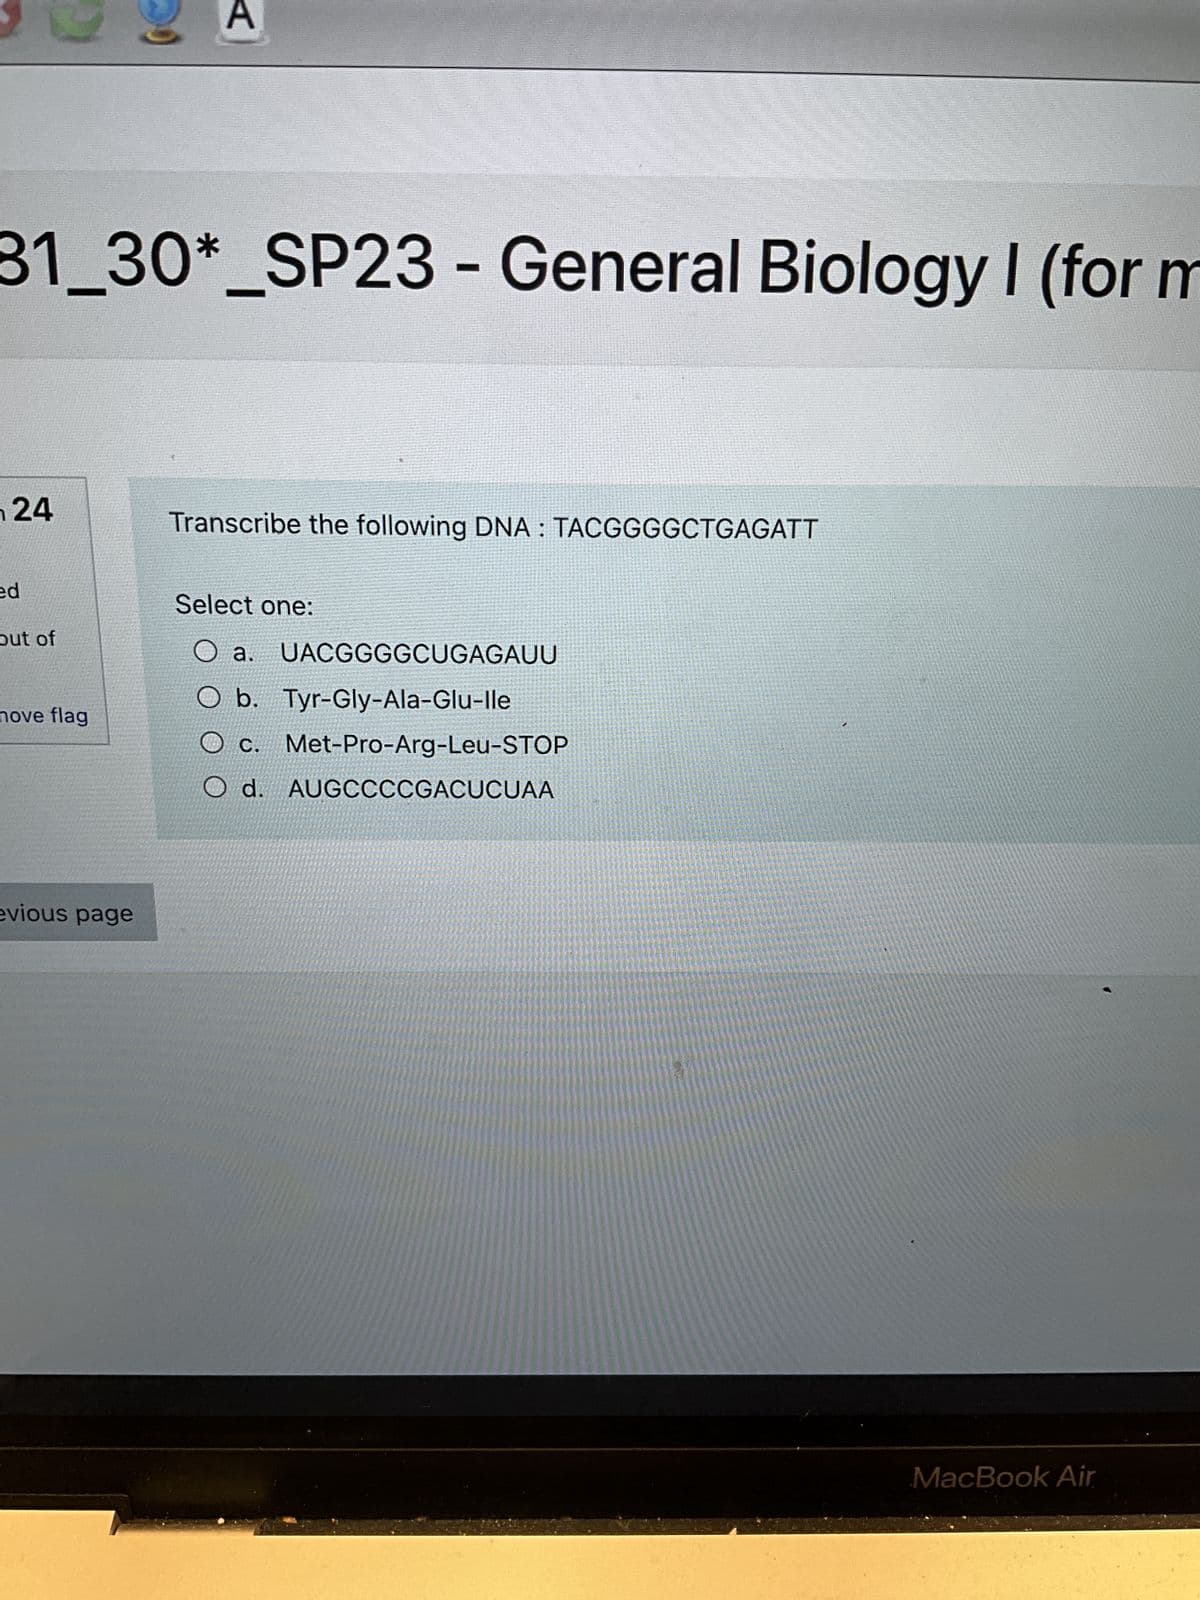 31_30*_SP23 - General Biology I (for m
24
ed
out of
nove flag
evious page
A
$
Transcribe the following DNA: TACGGGGCTGAGATT
Select one:
O a. UACGGGGCUGAGAUU
O b. Tyr-Gly-Ala-Glu-lle
C. Met-Pro-Arg-Leu-STOP
O d. AUGCCCCGACUCUAA
MacBook Air